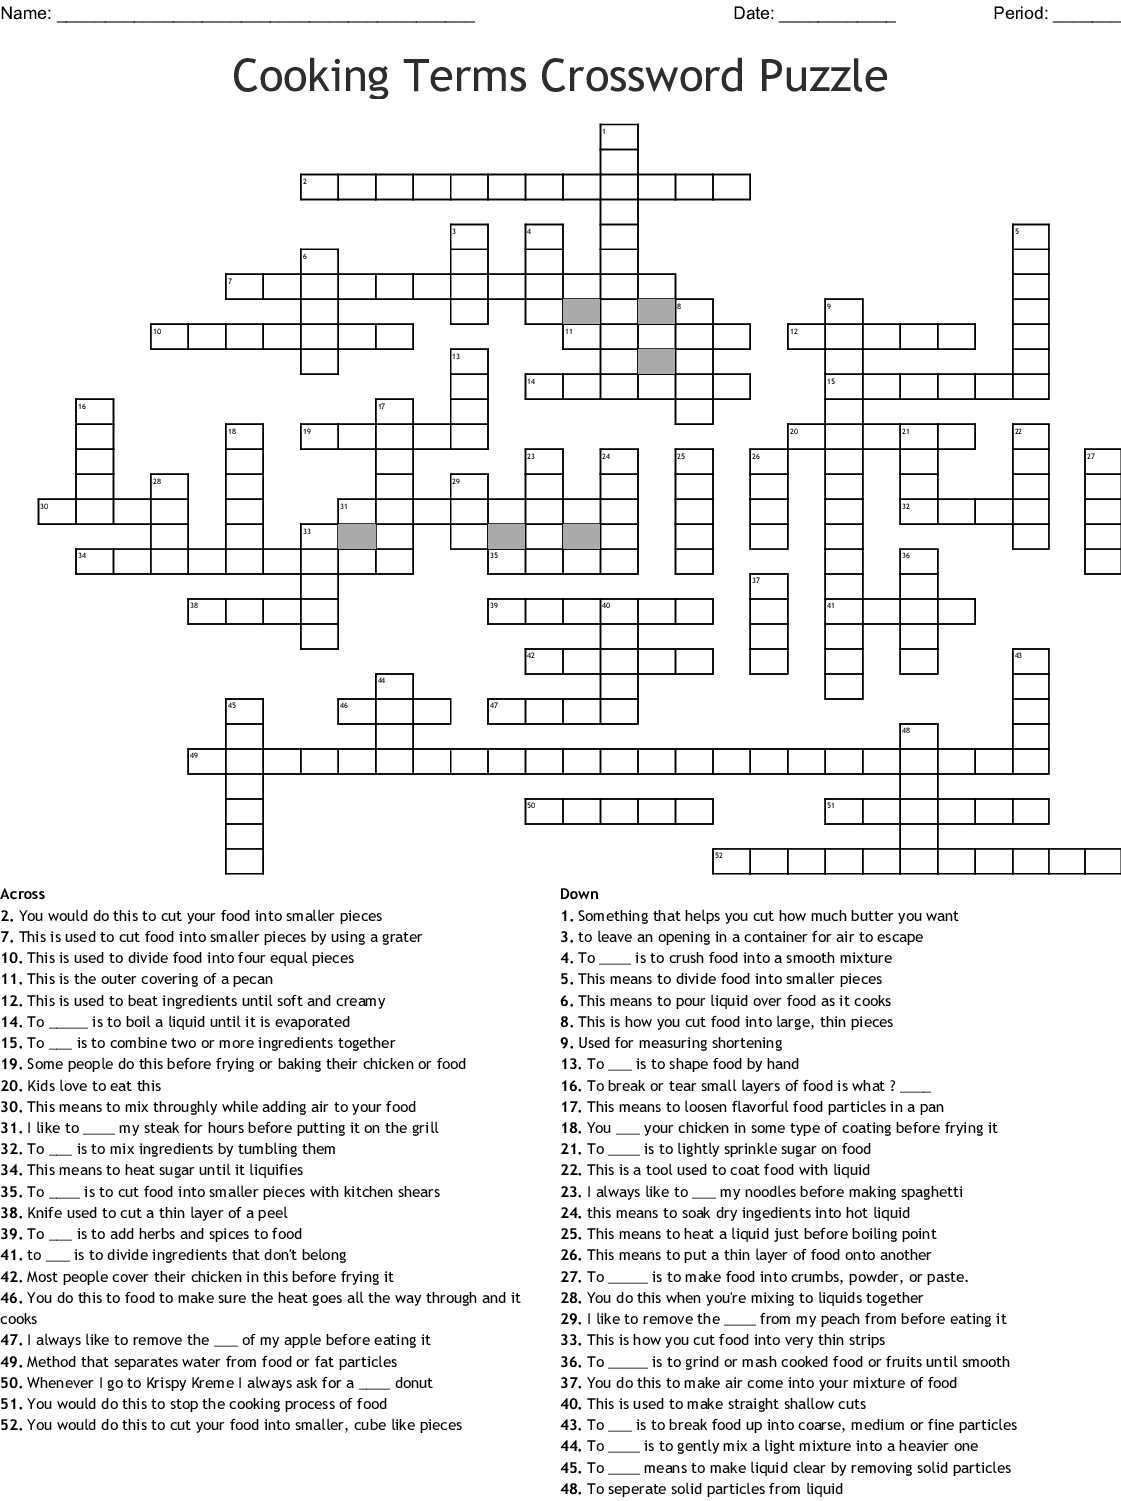 Cooking Terms Crossword Puzzle Printable